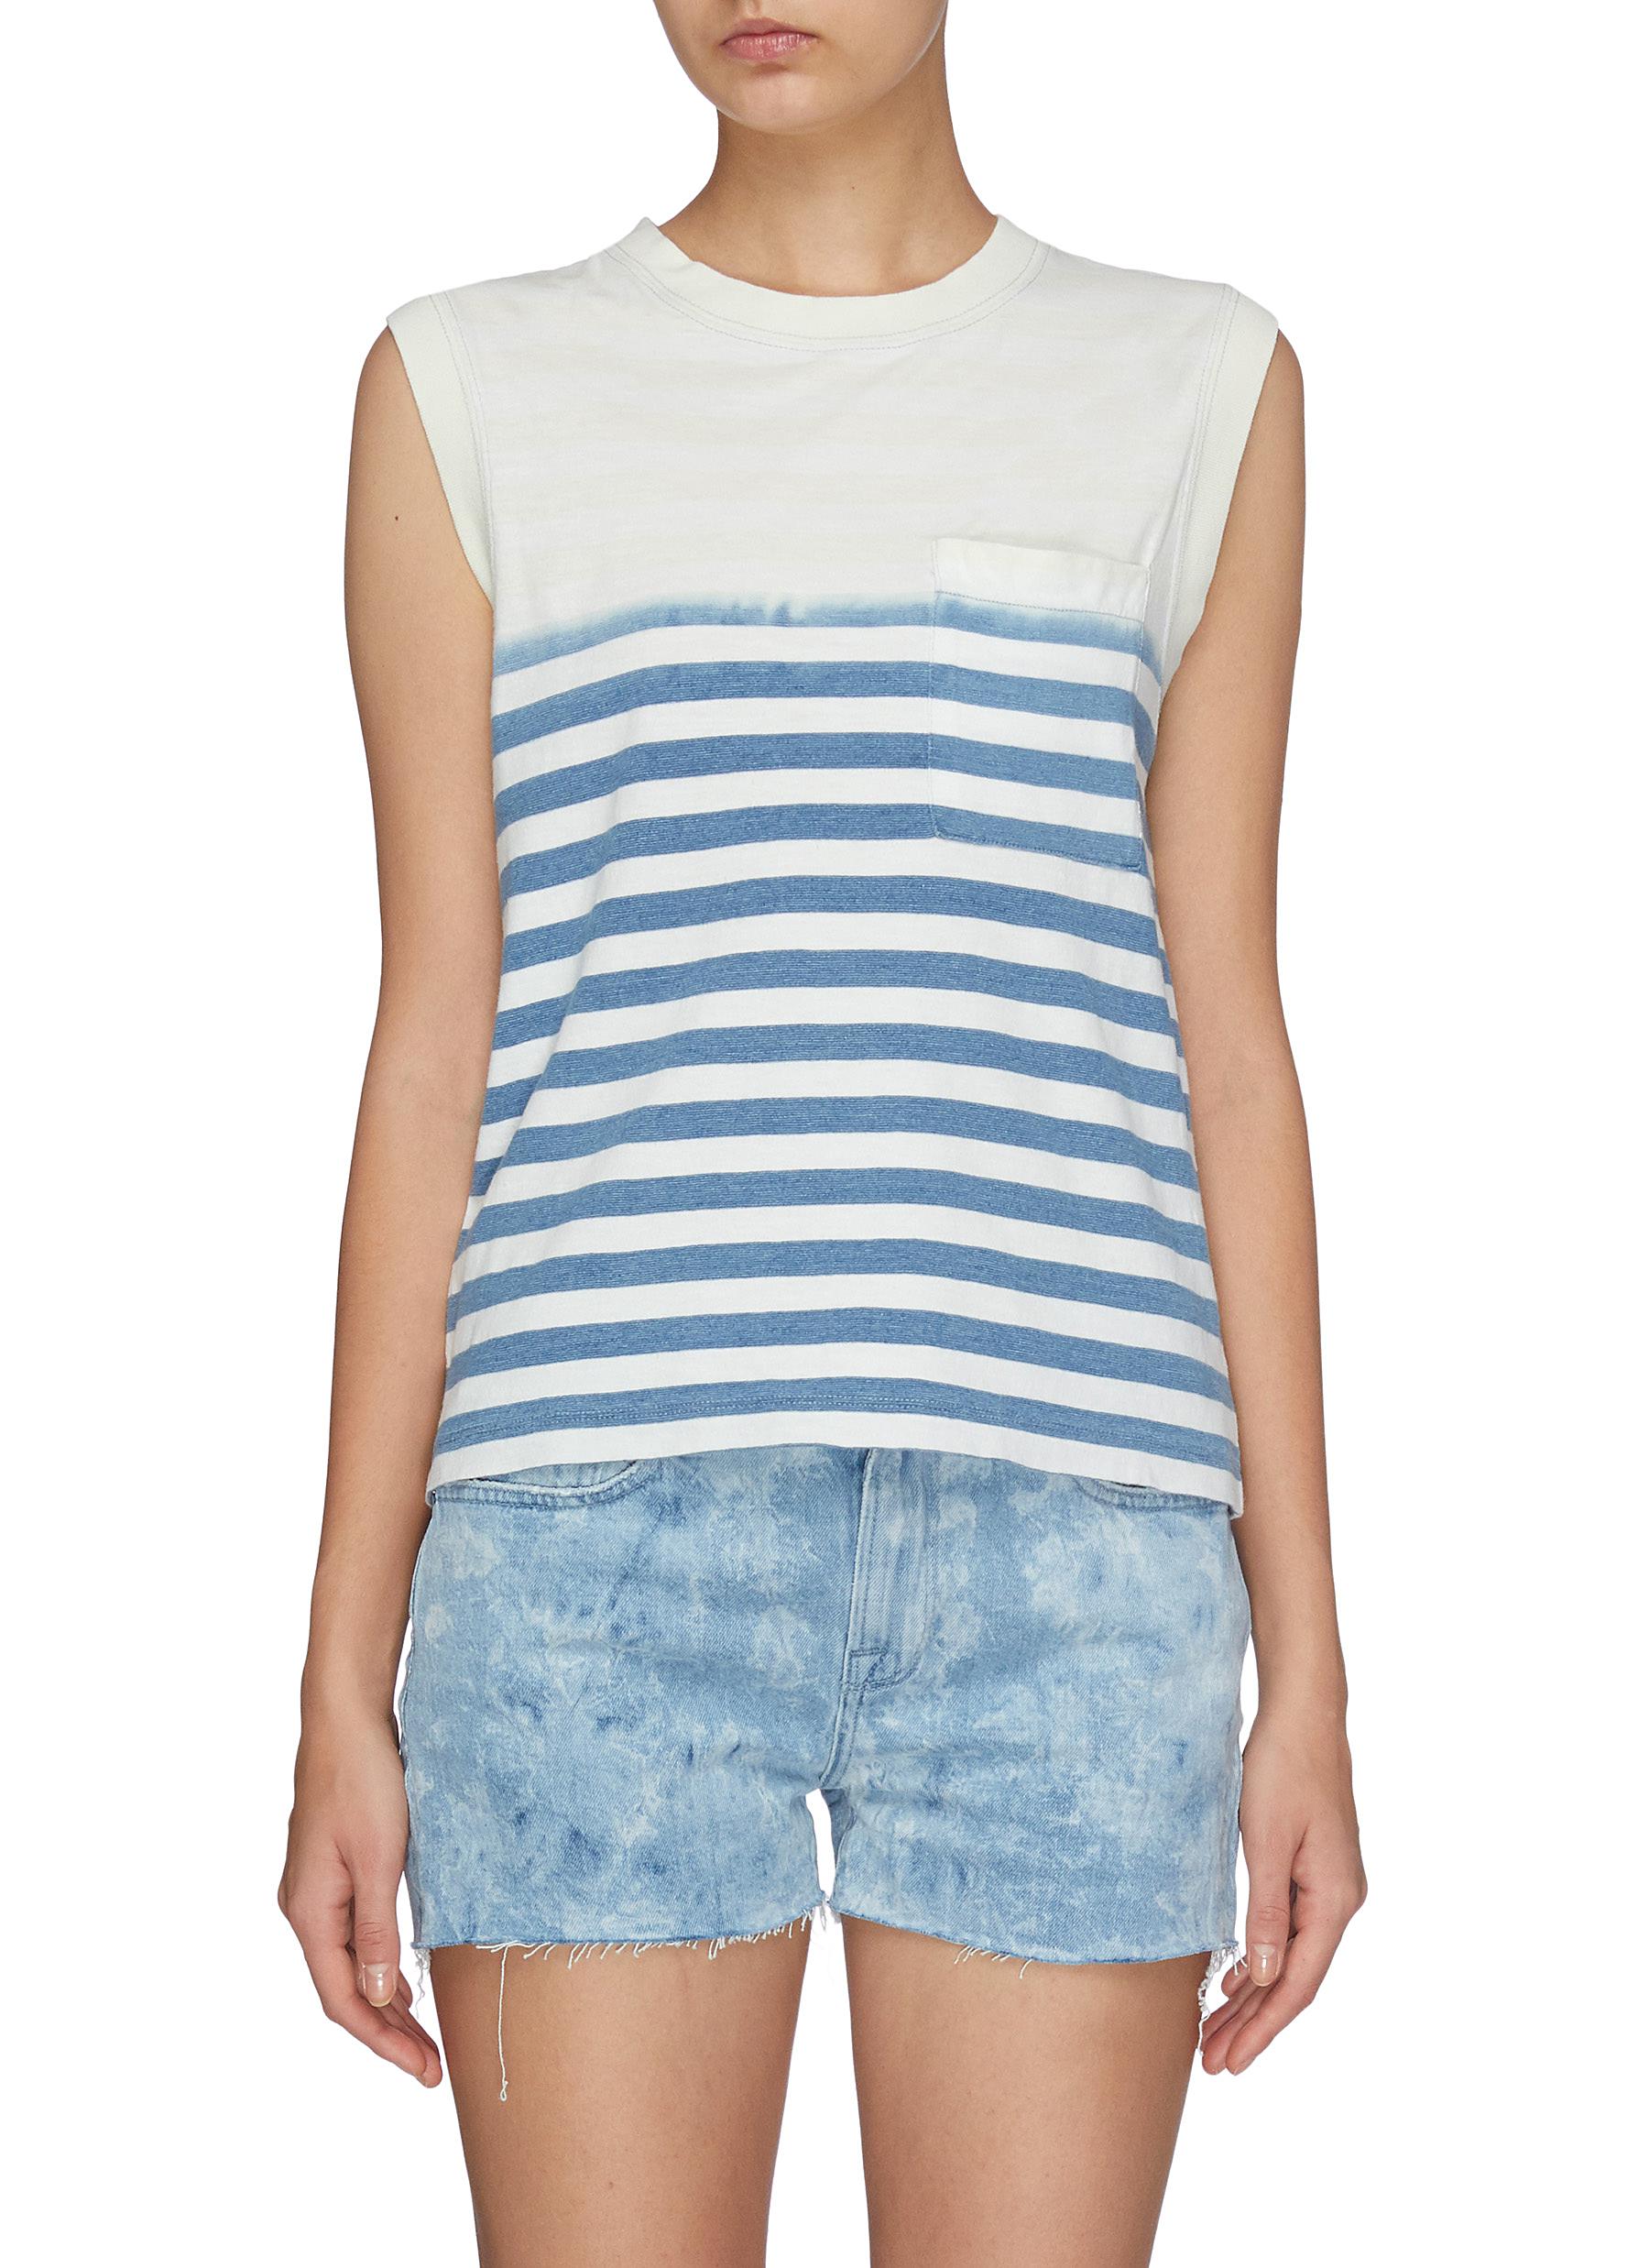 The Poolbay chest pocket stripe tank top by Current/Elliott